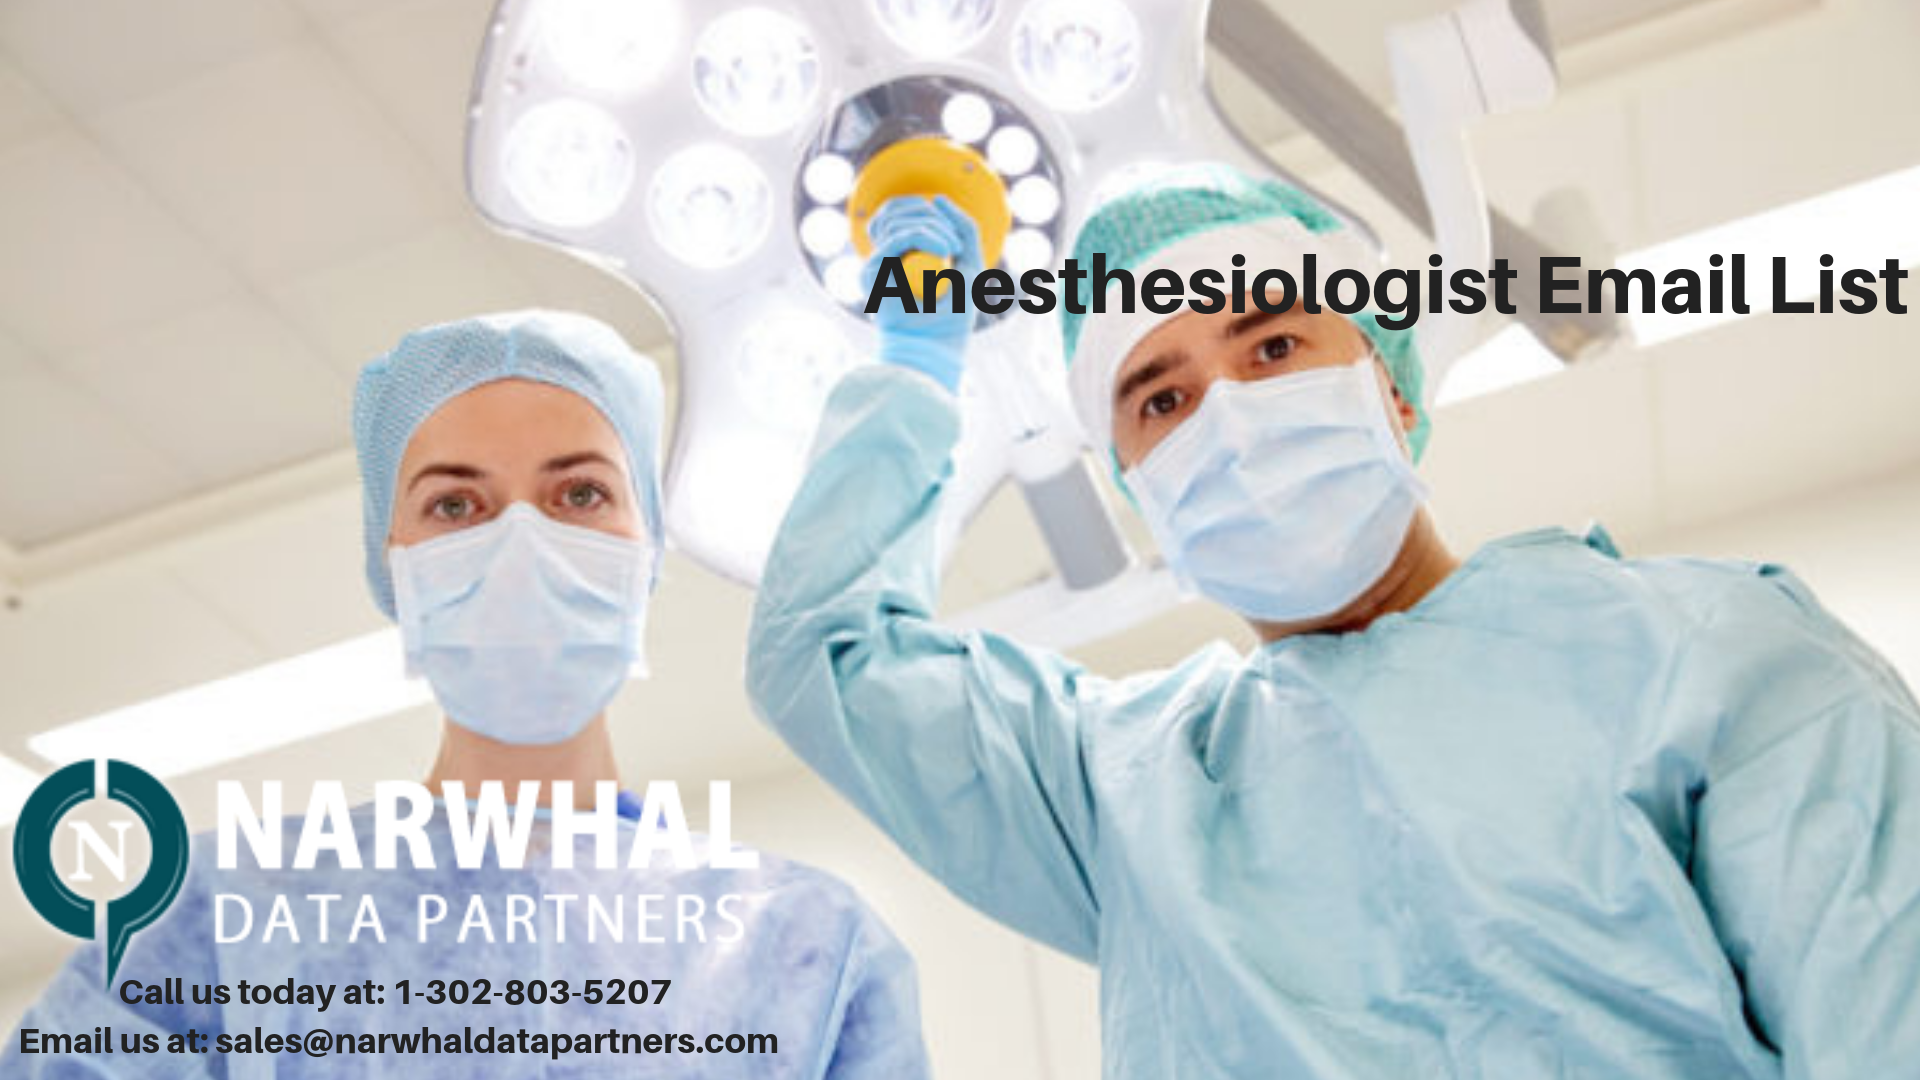 http://narwhaldatapartners.com/anesthesiologist-email-list.html